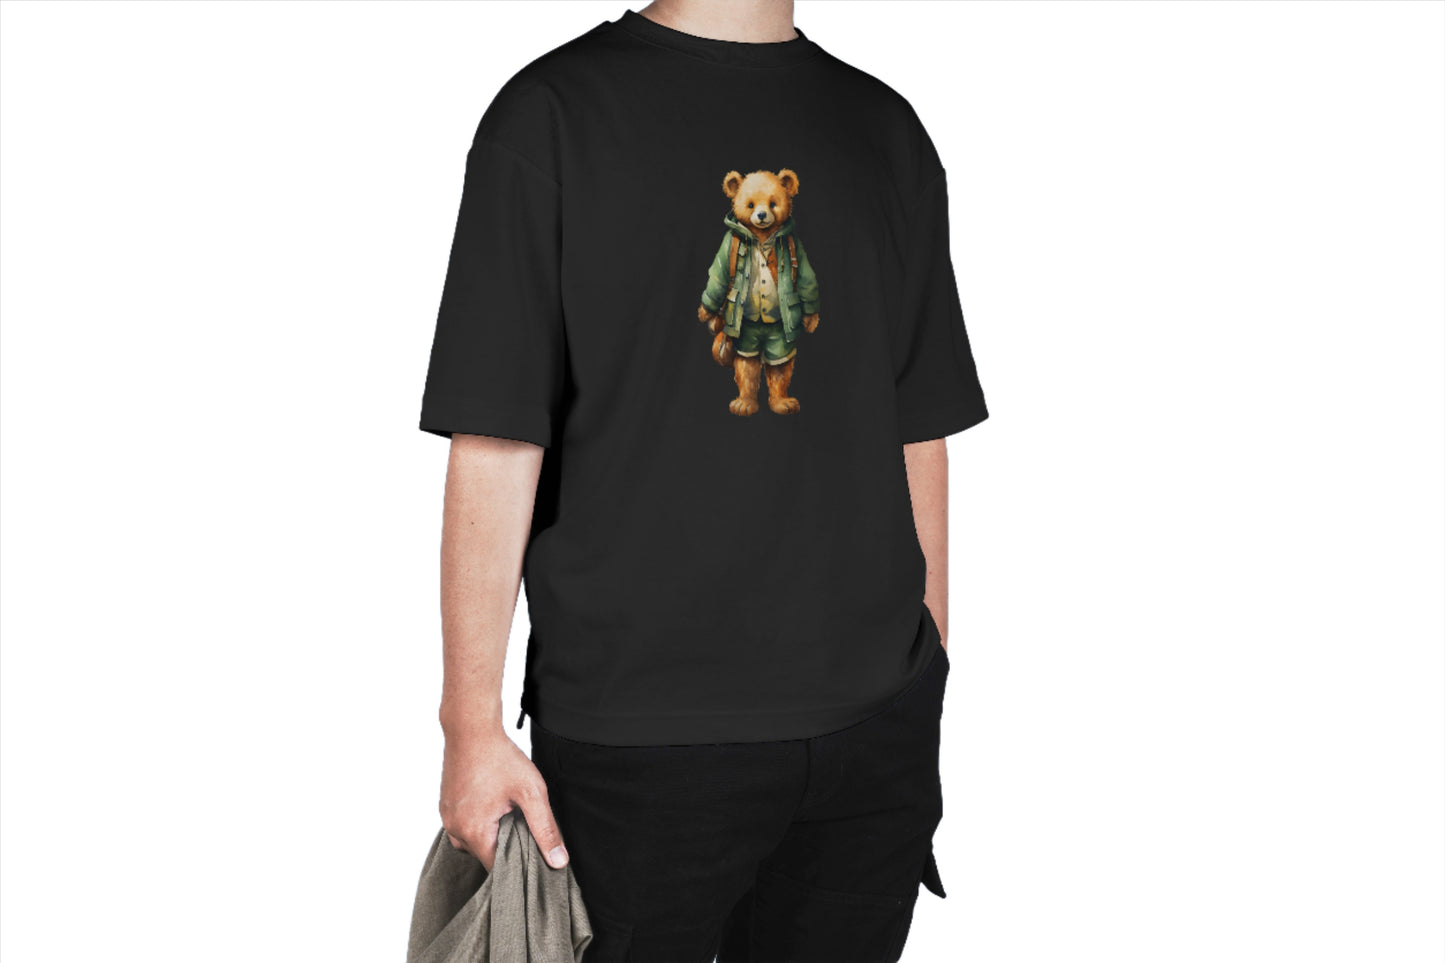 Comfort Fit Black T-Shirt with Bear Print